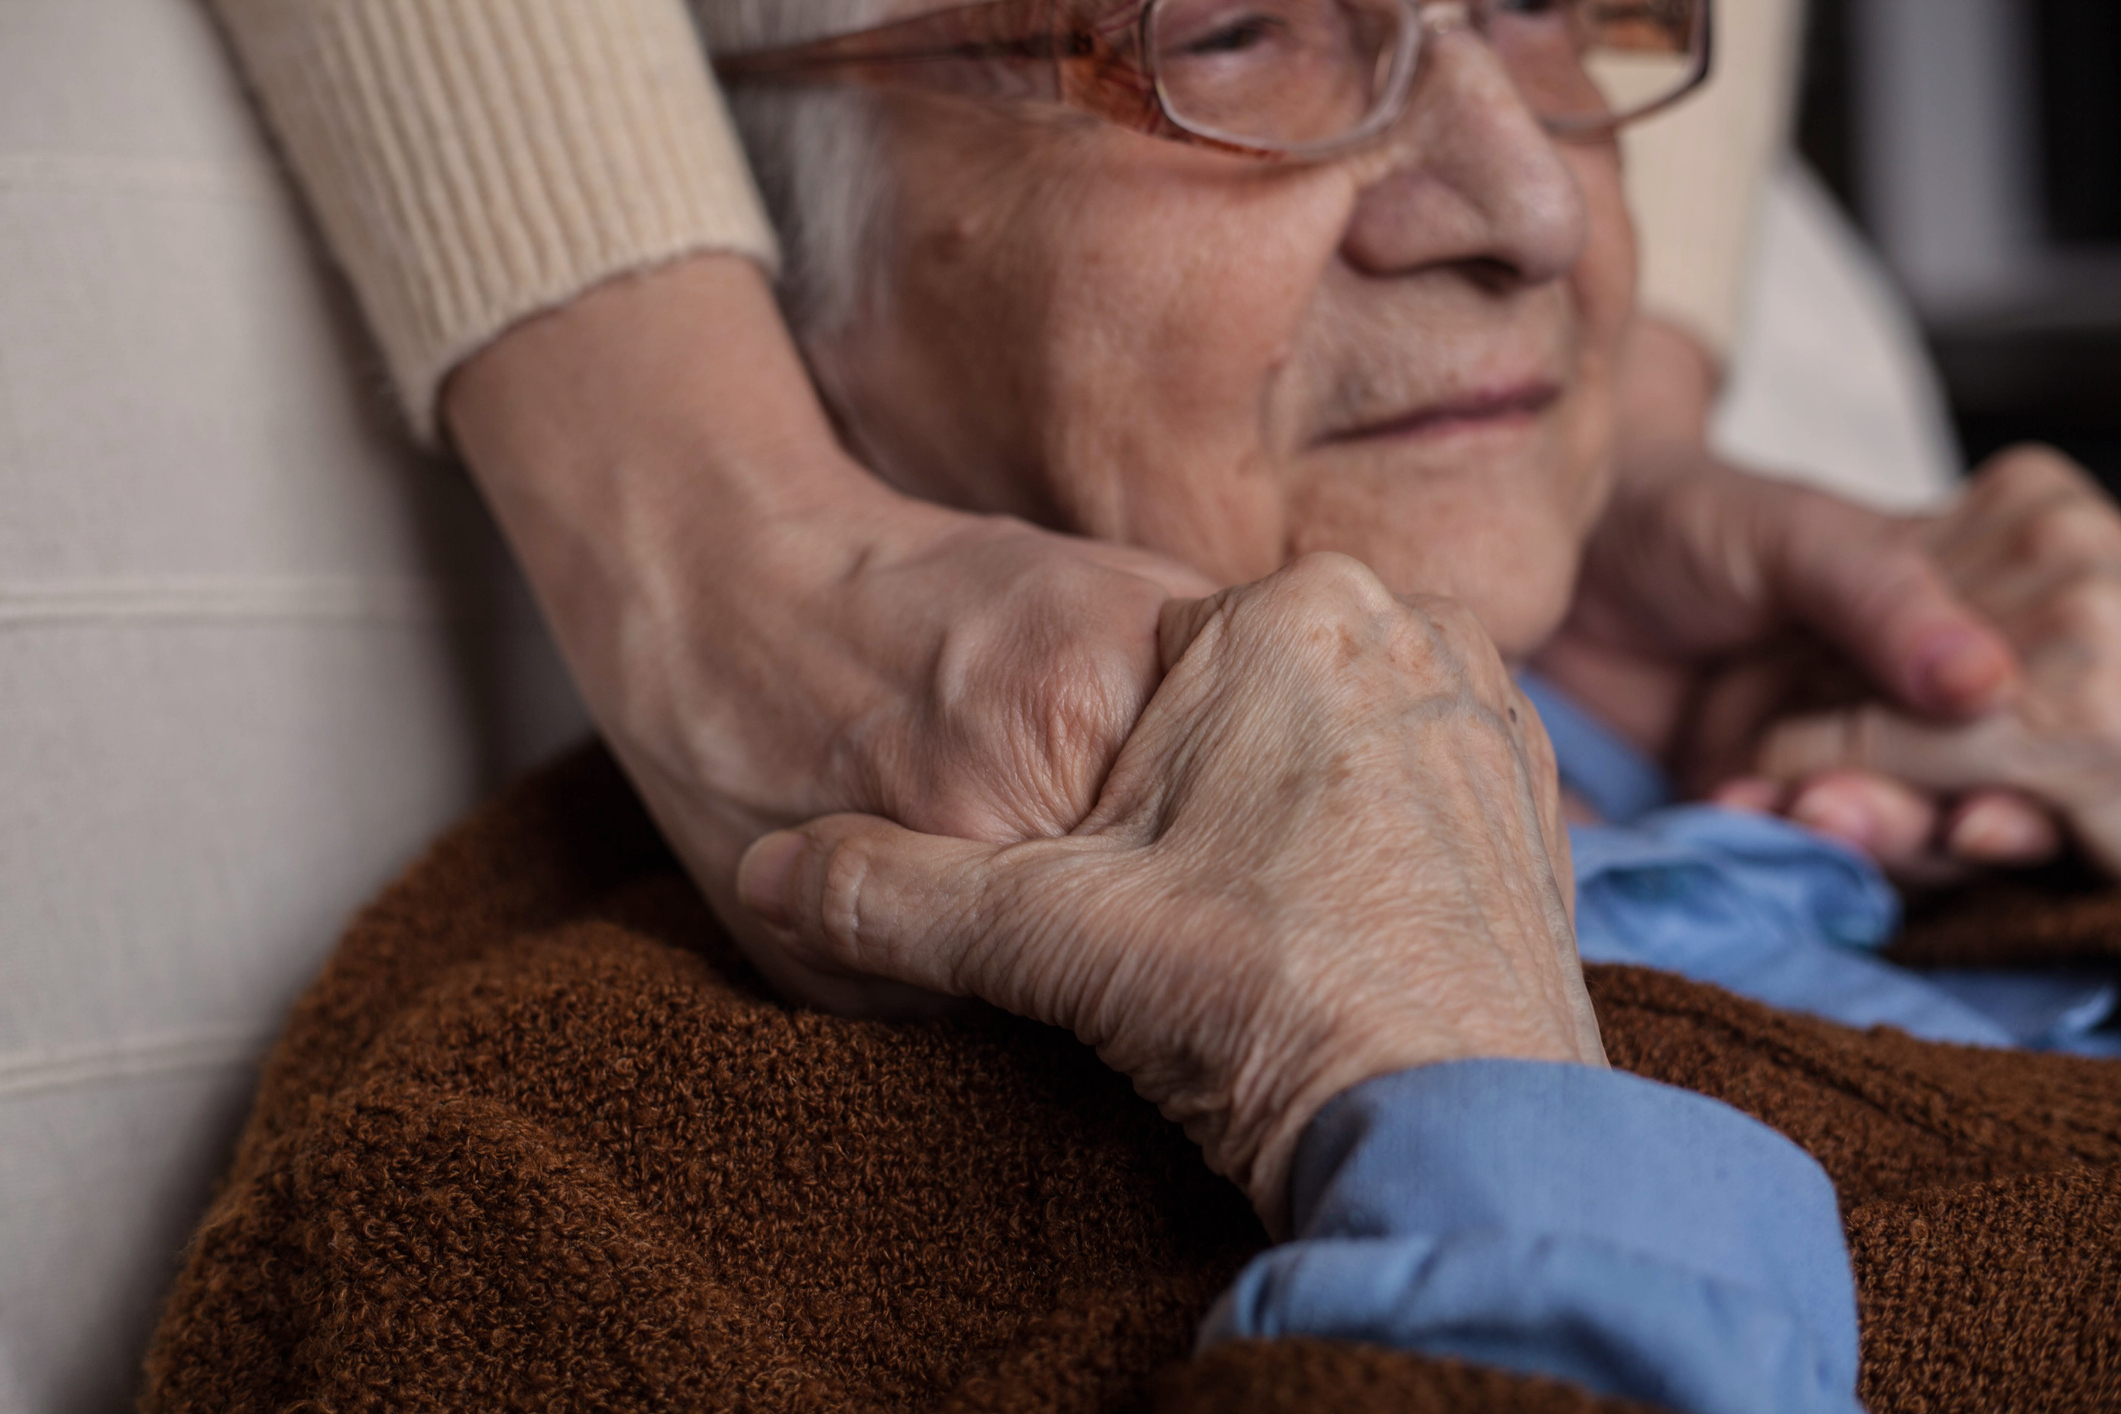 Learn what to expect when caring for an older adult loved one in the late stage of dementia.